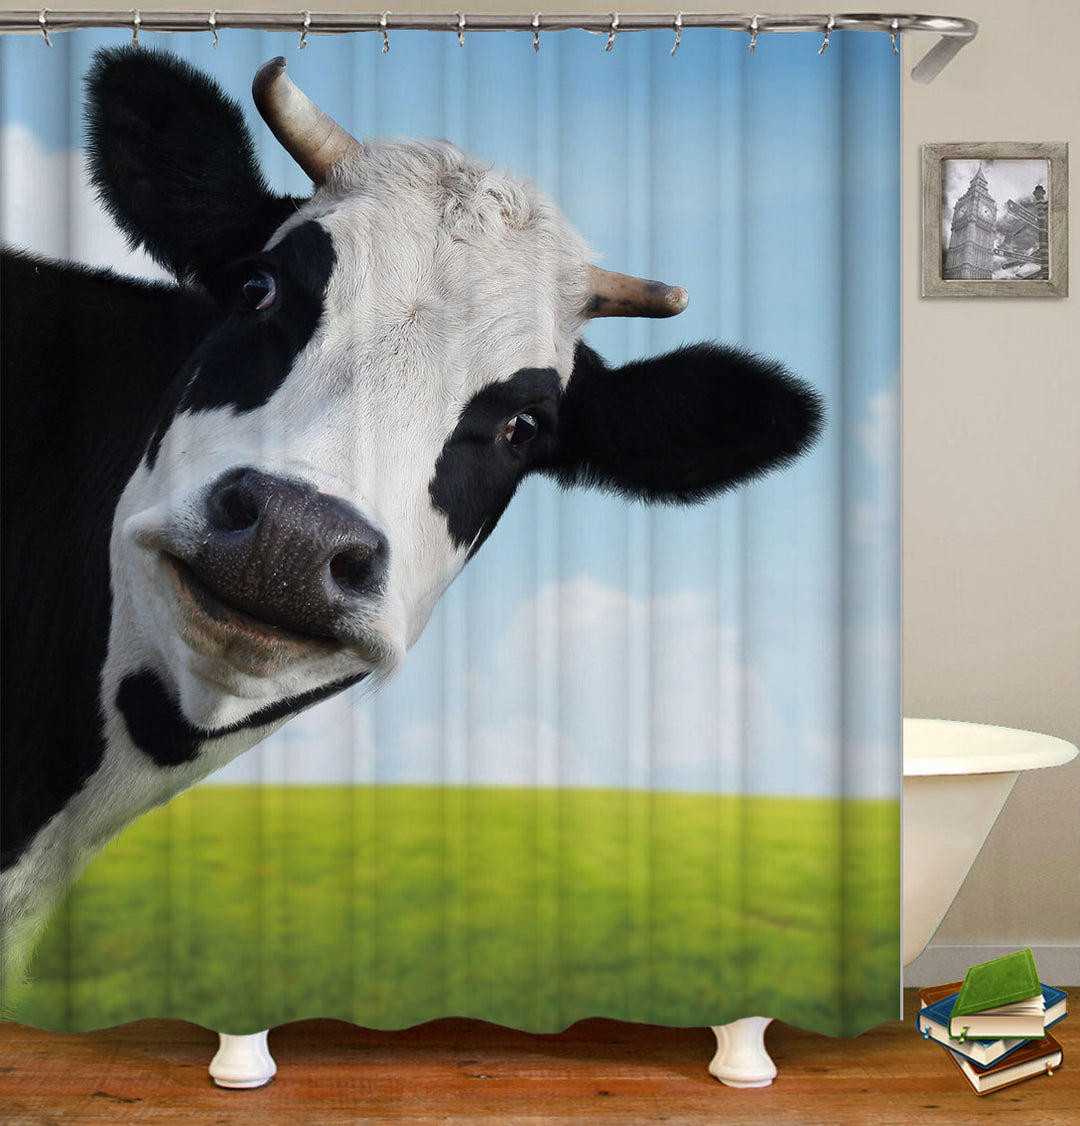 Cute Farm Animals Shower Curtain with Funny Cow